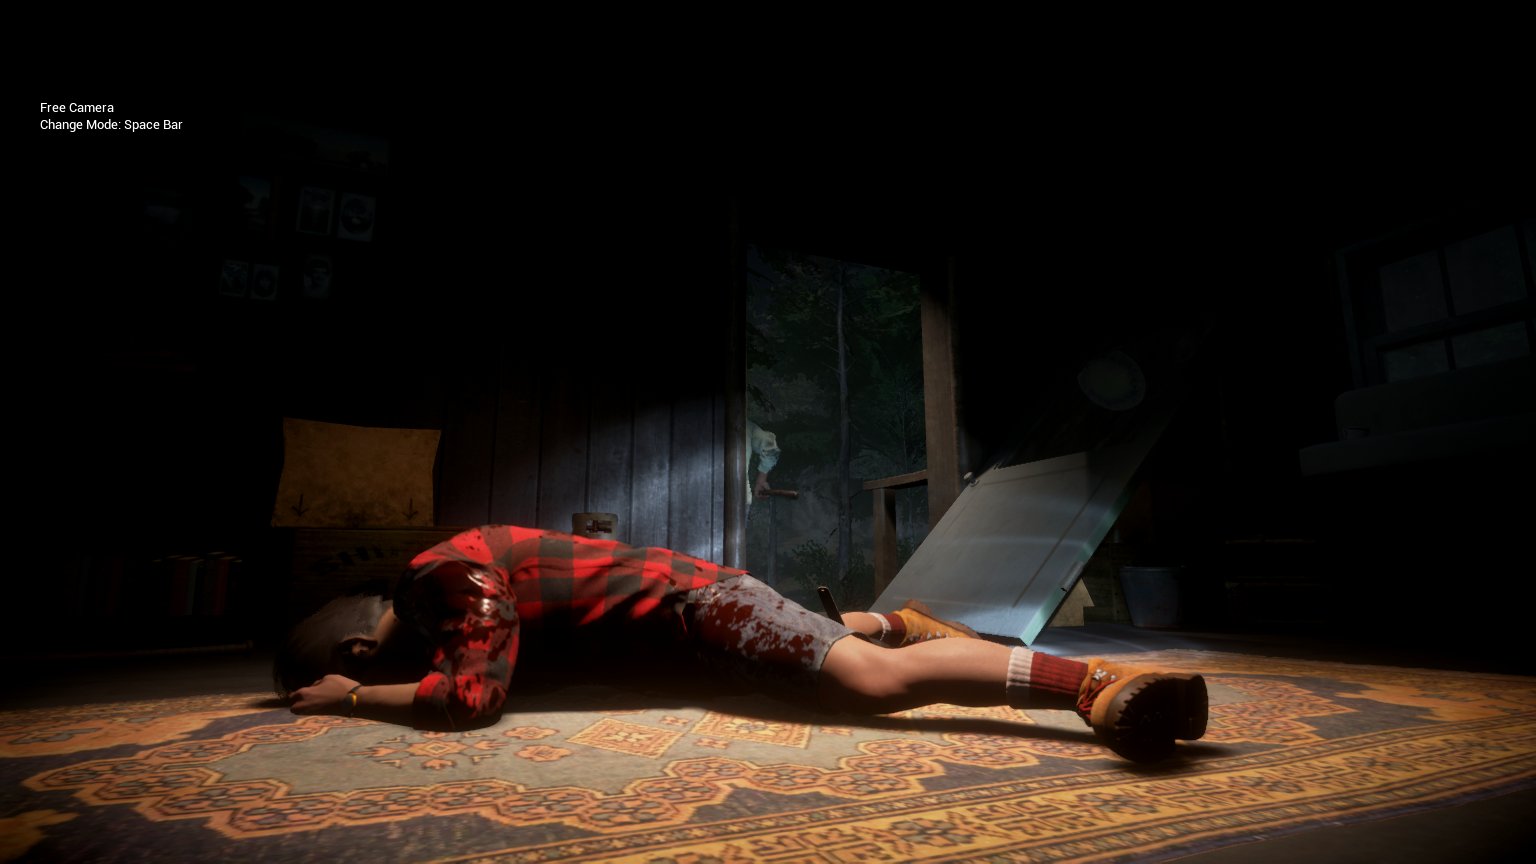 Friday the 13th: The Game screenshot 8515